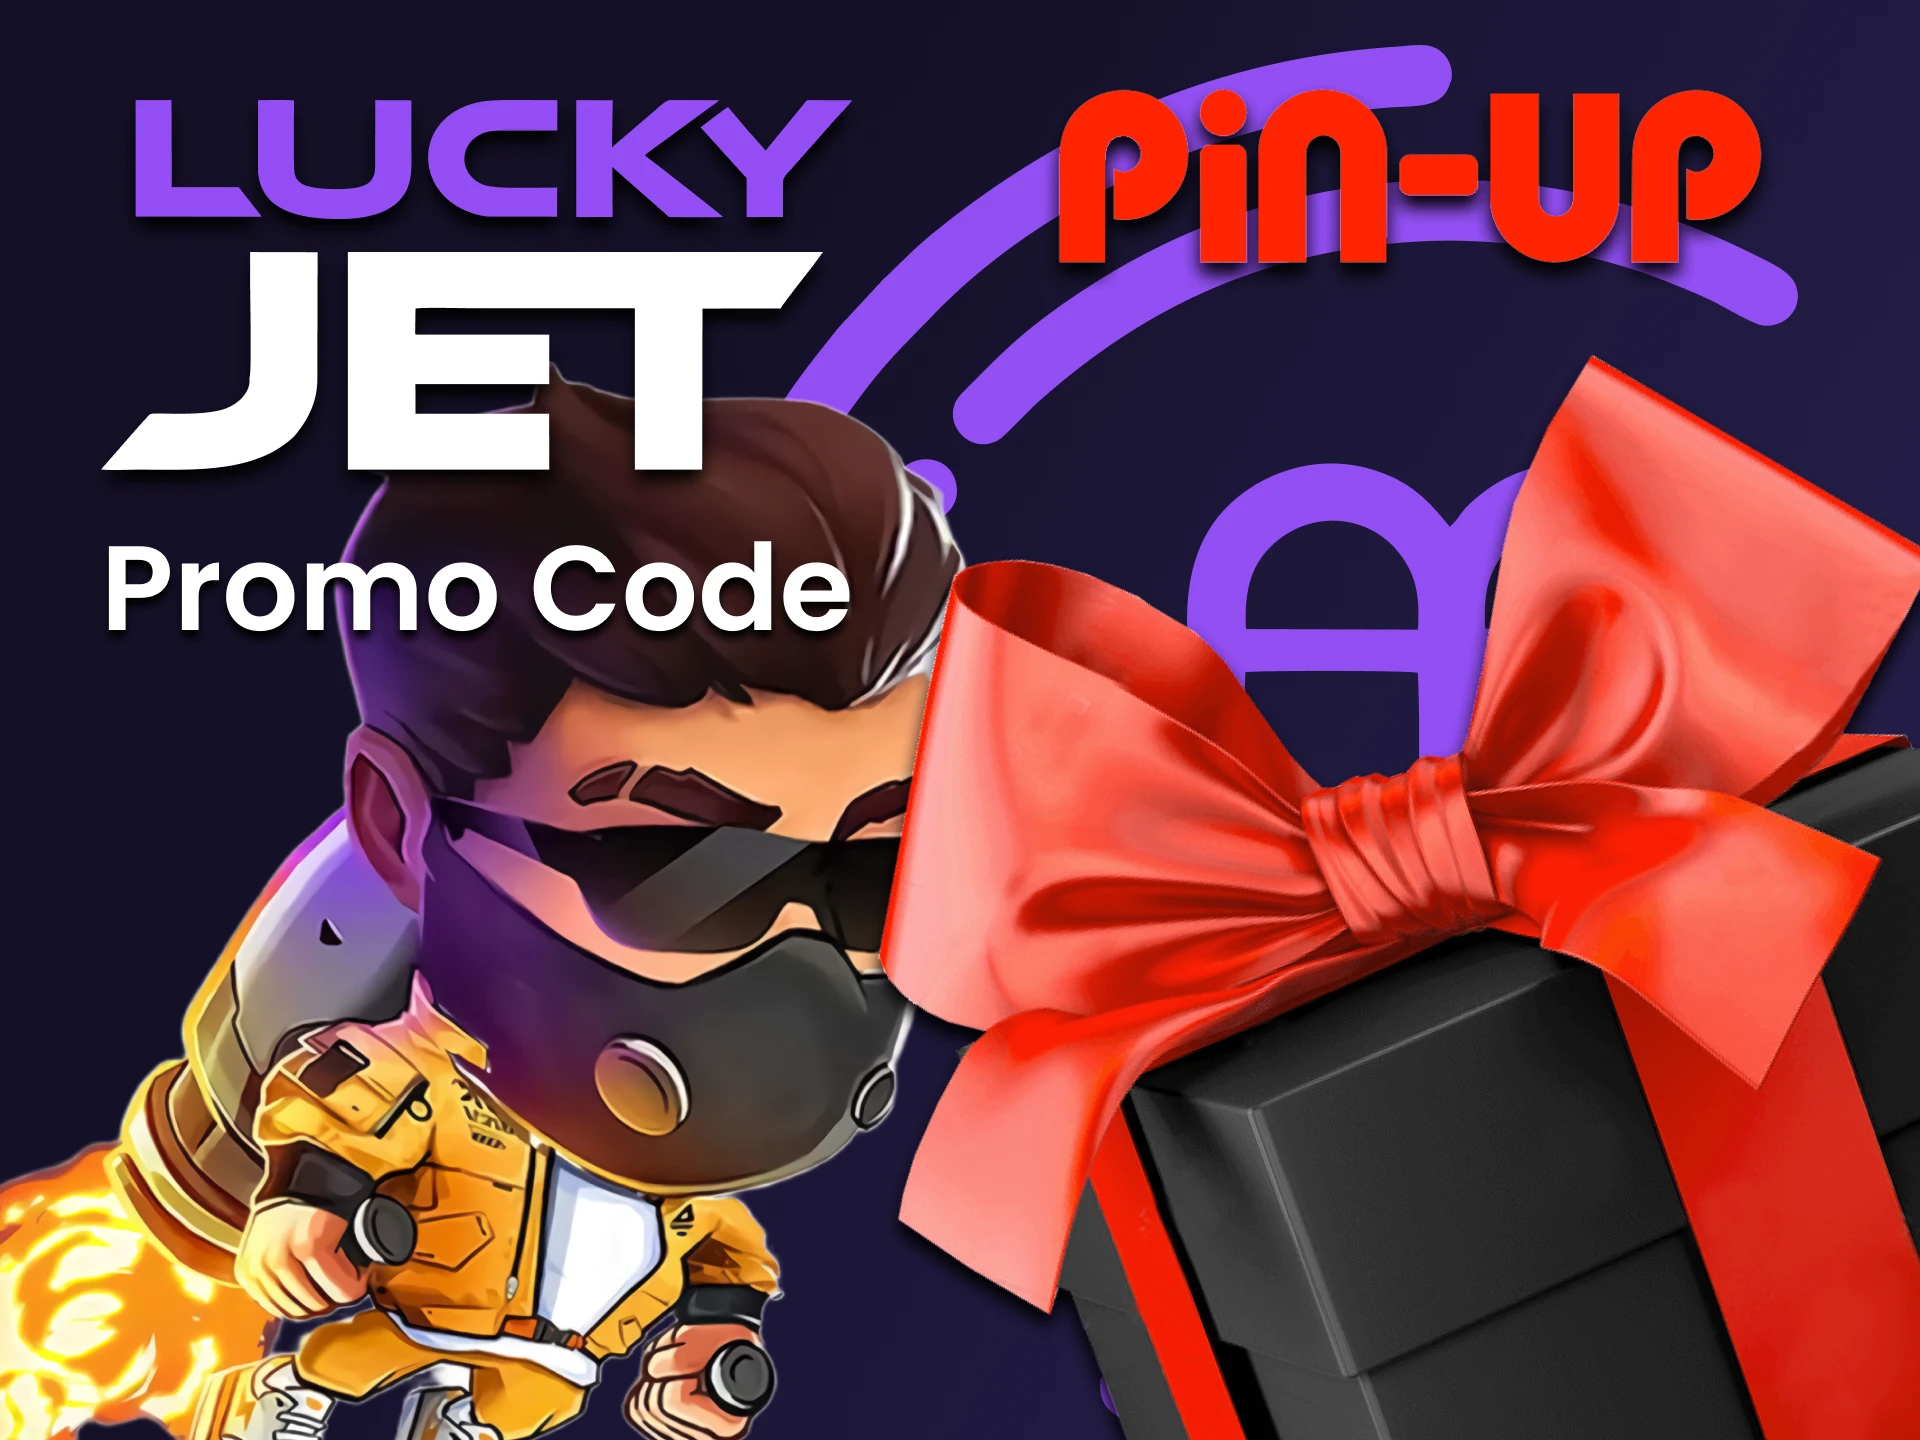 Get a promo code for Lucky Jet from Pin Up.